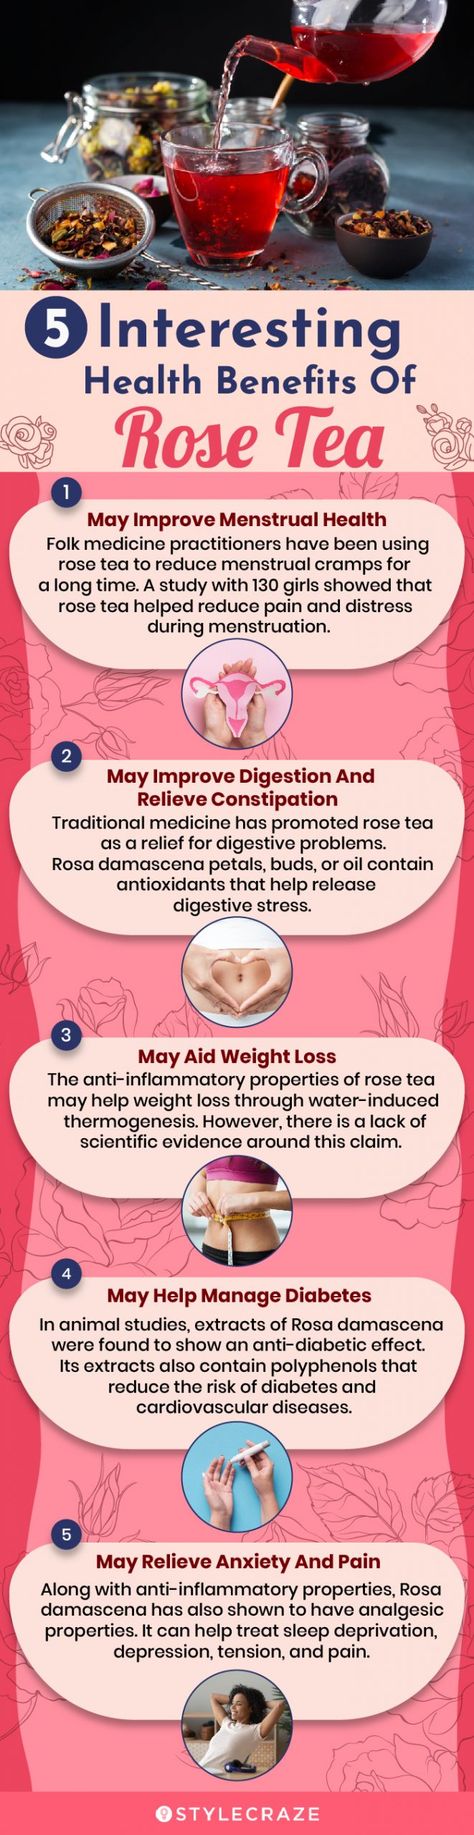 How Is Rose Tea Good For Your Health And Well-being? Ideas, Fitness, Acupuncture, Healing Food, Healing Herbs, Herbalism, Tea Benefits, Hibiscus Tea Benefits, Digestion Problems